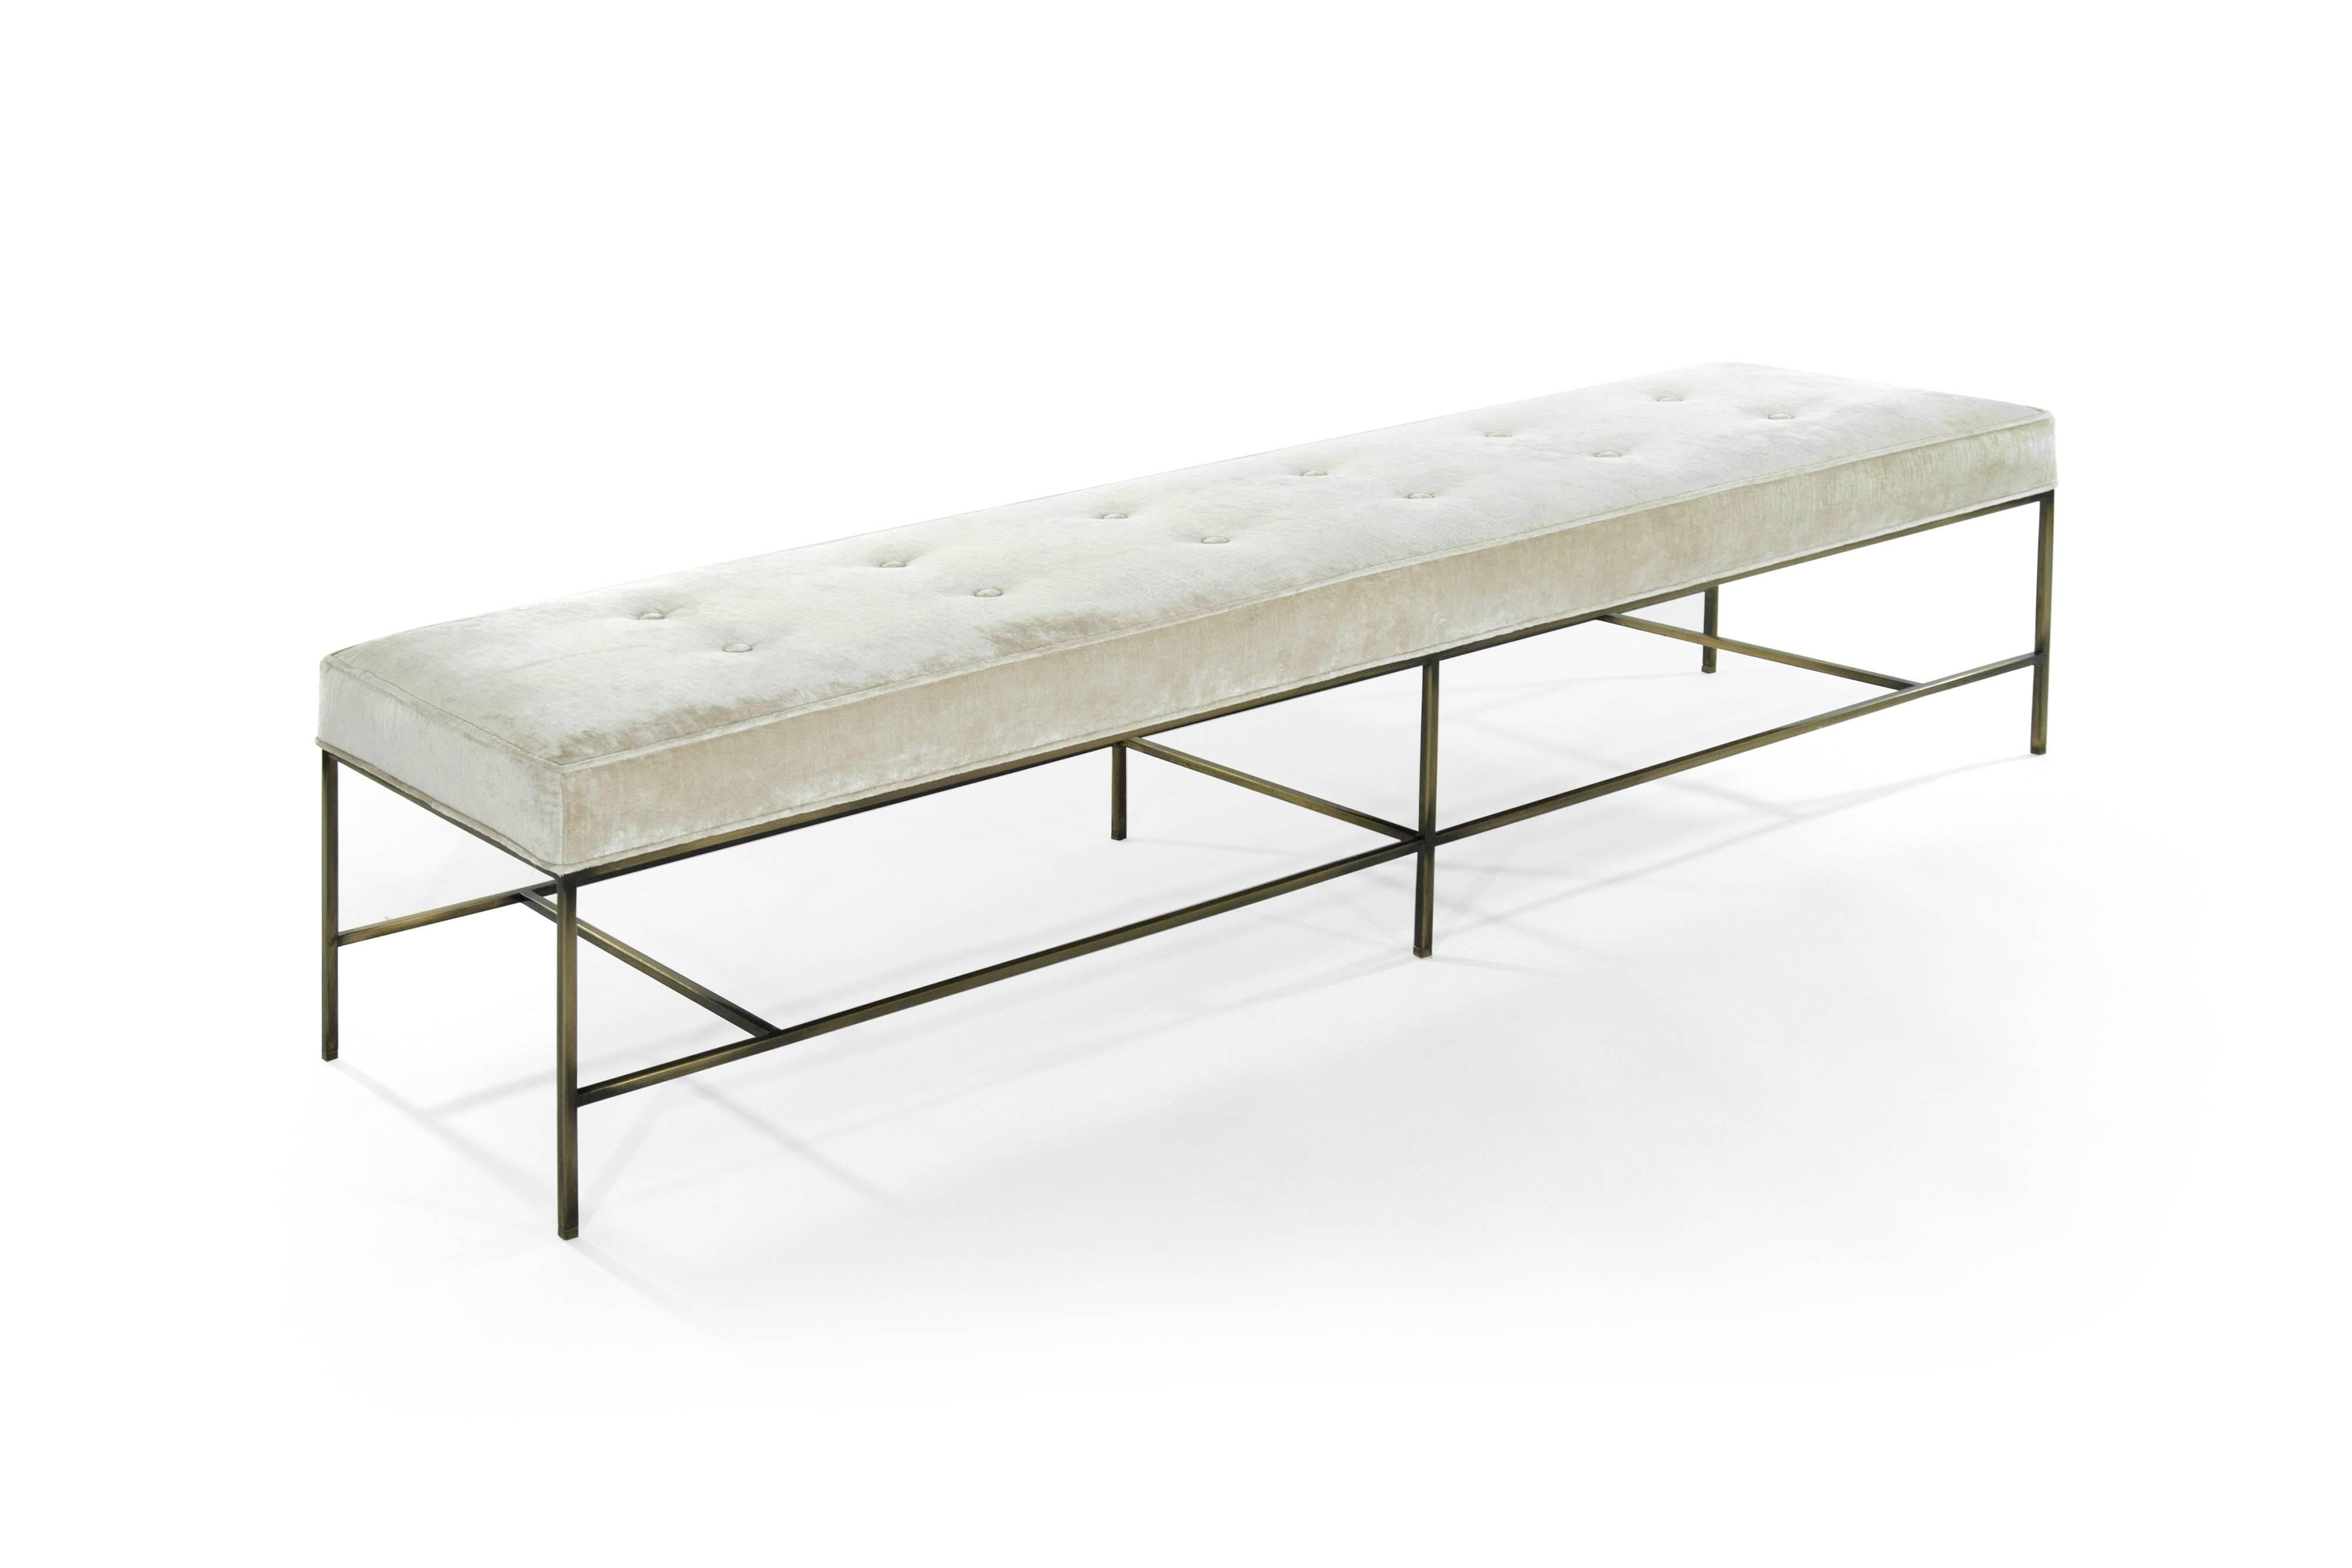 The Architectural Bench is light and angular with impeccable lines. The extra-long cushion upholstered in a neutral chenille is uplifted with a bronze frame. Paul McCobb’s design influence shines through with masterful minimalism. Slender legs and